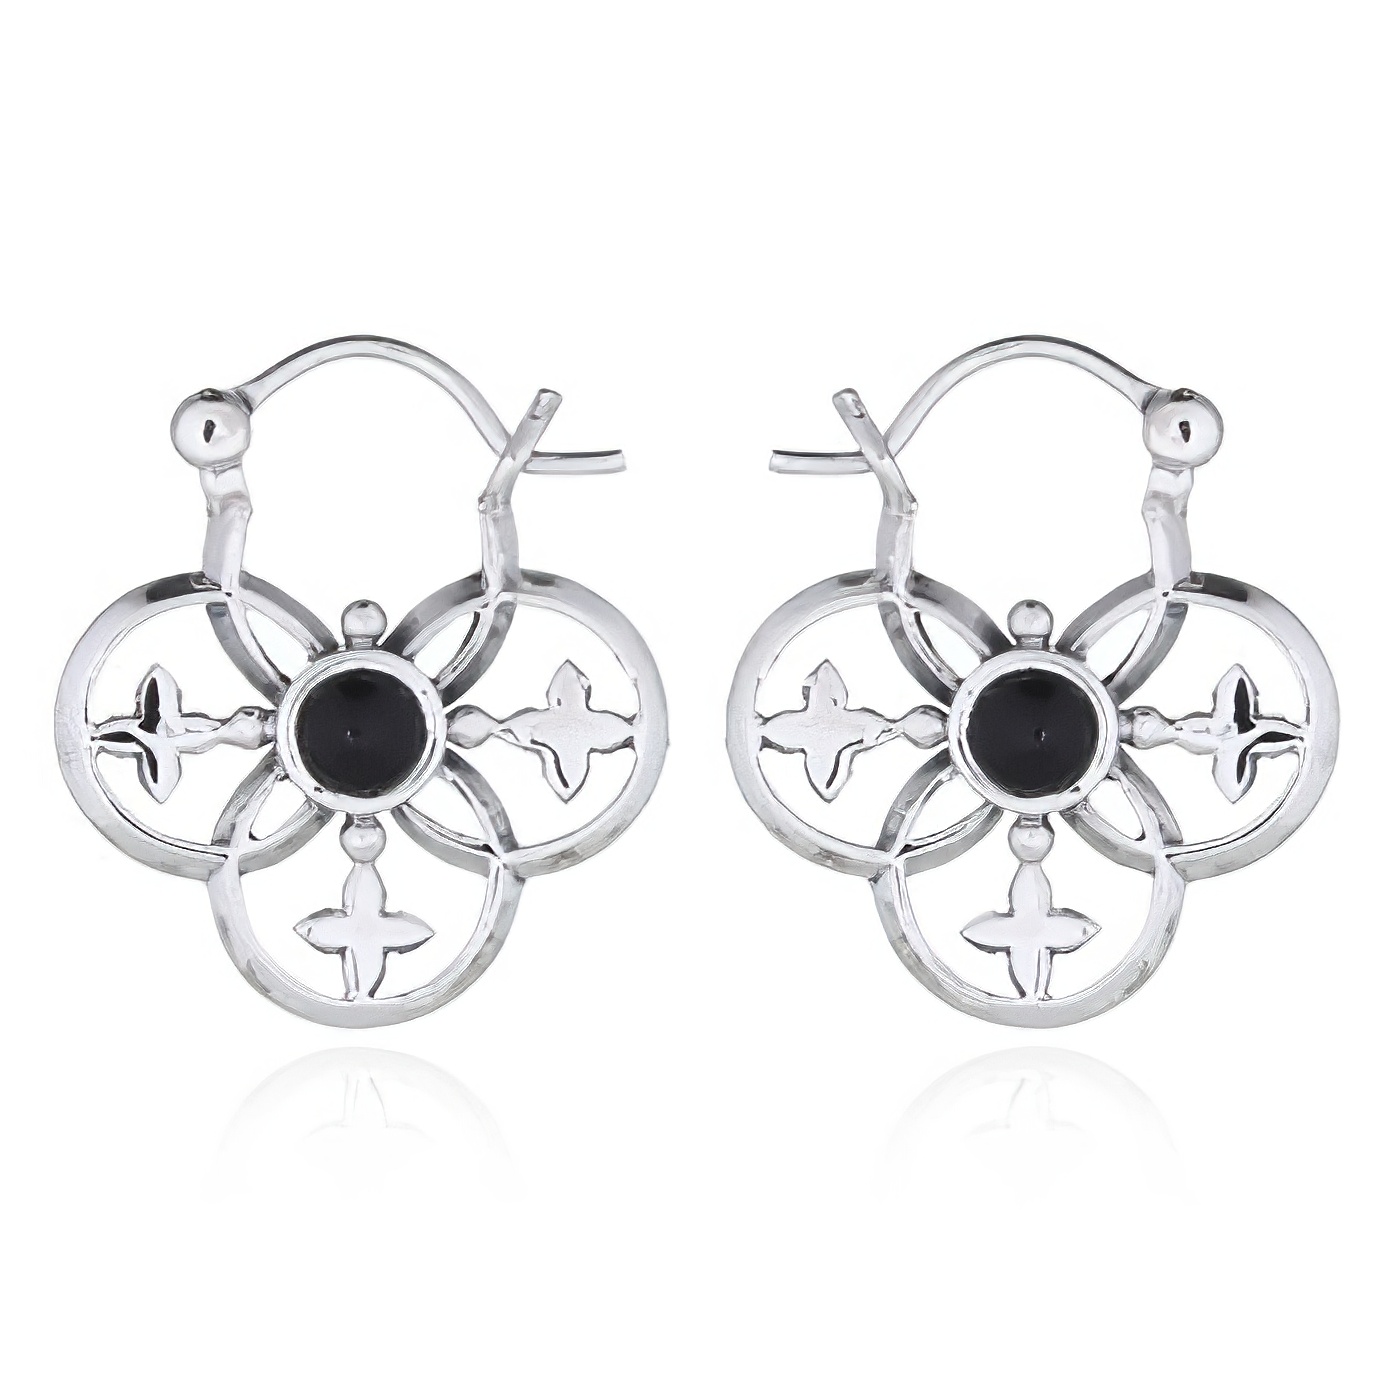 Ace Of Clubs Reconstituted Black Stone Hoop Earrings 925 Silver by BeYindi 